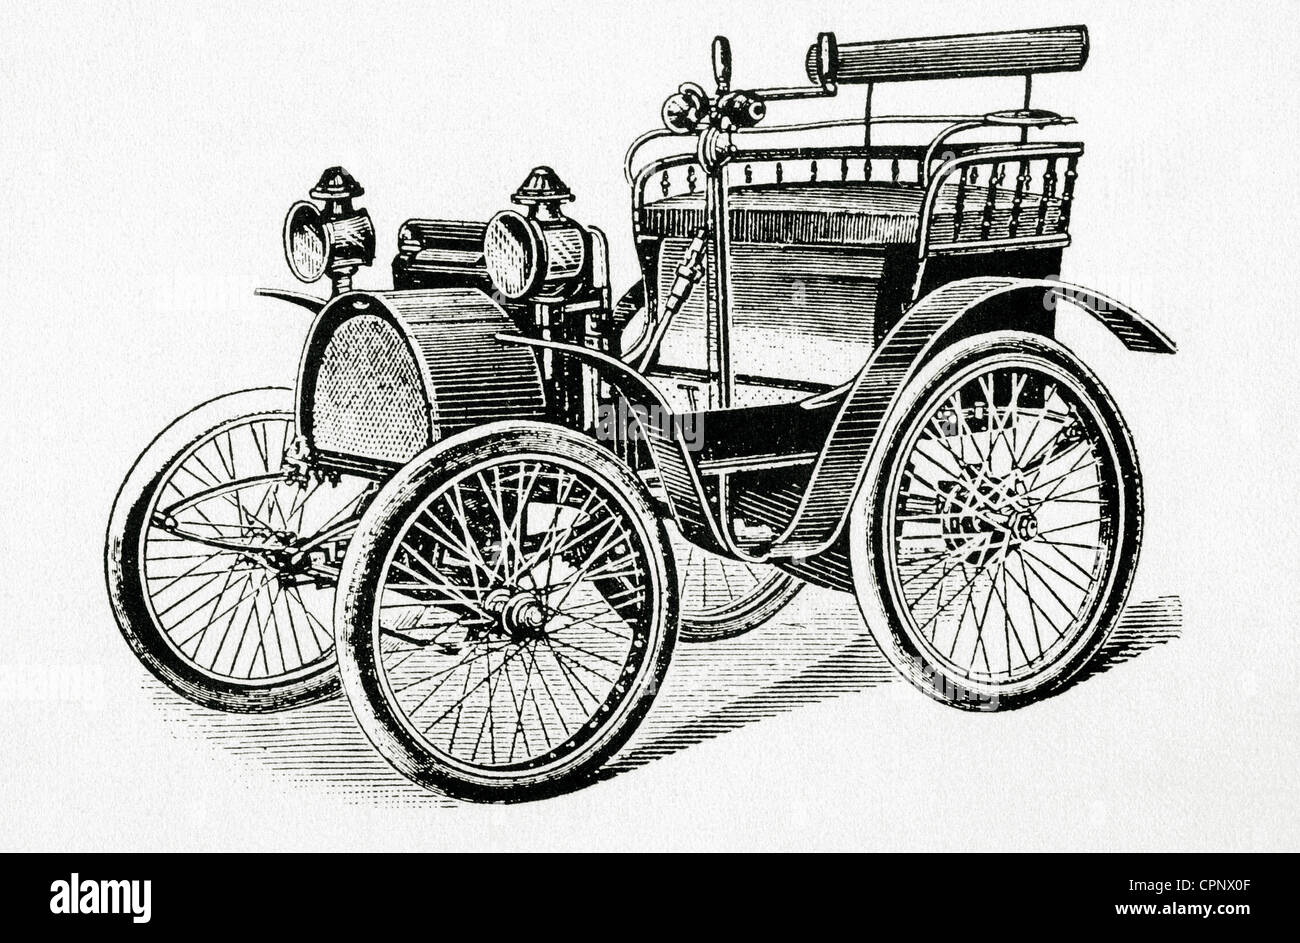 Car. Late 19th century. Engraving. Stock Photo